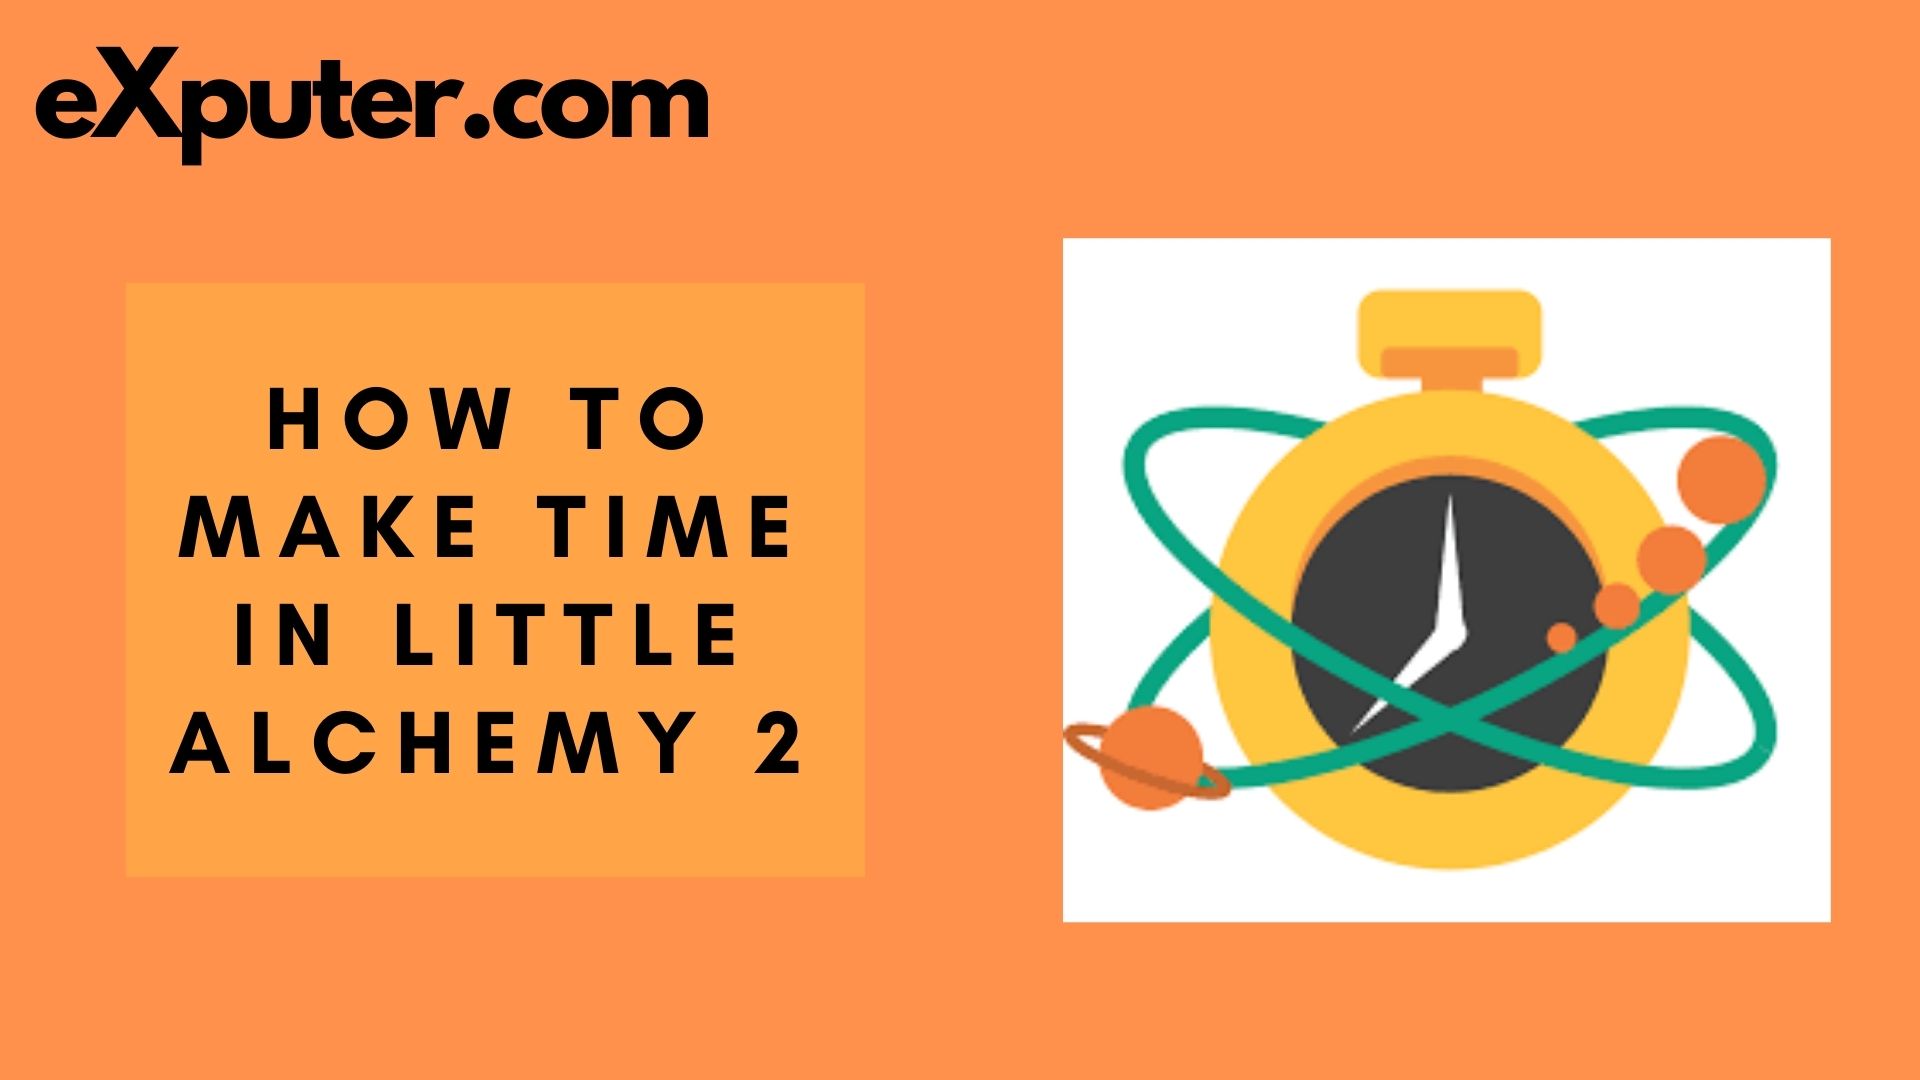 How to Make Time in Little Alchemy 2 [Guide]